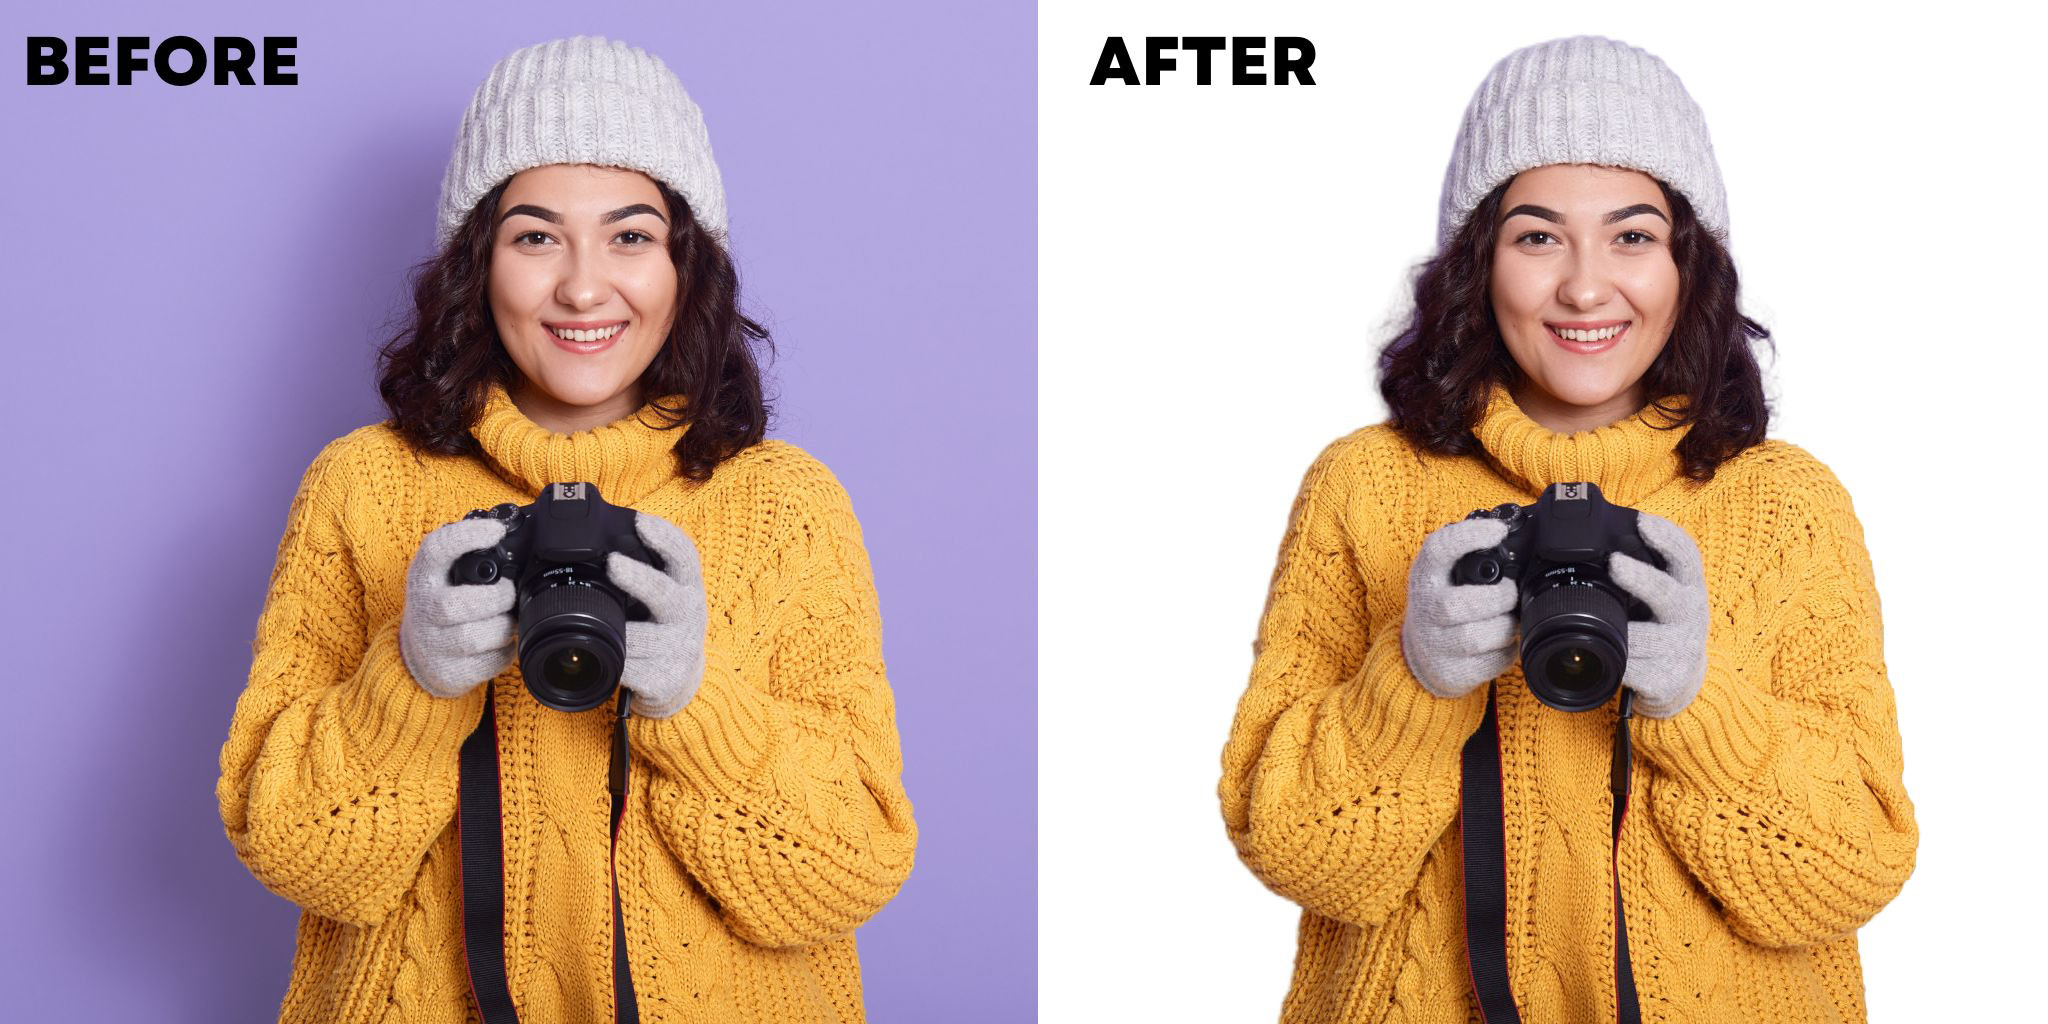 Background Removal Services to Maintain Image Quality